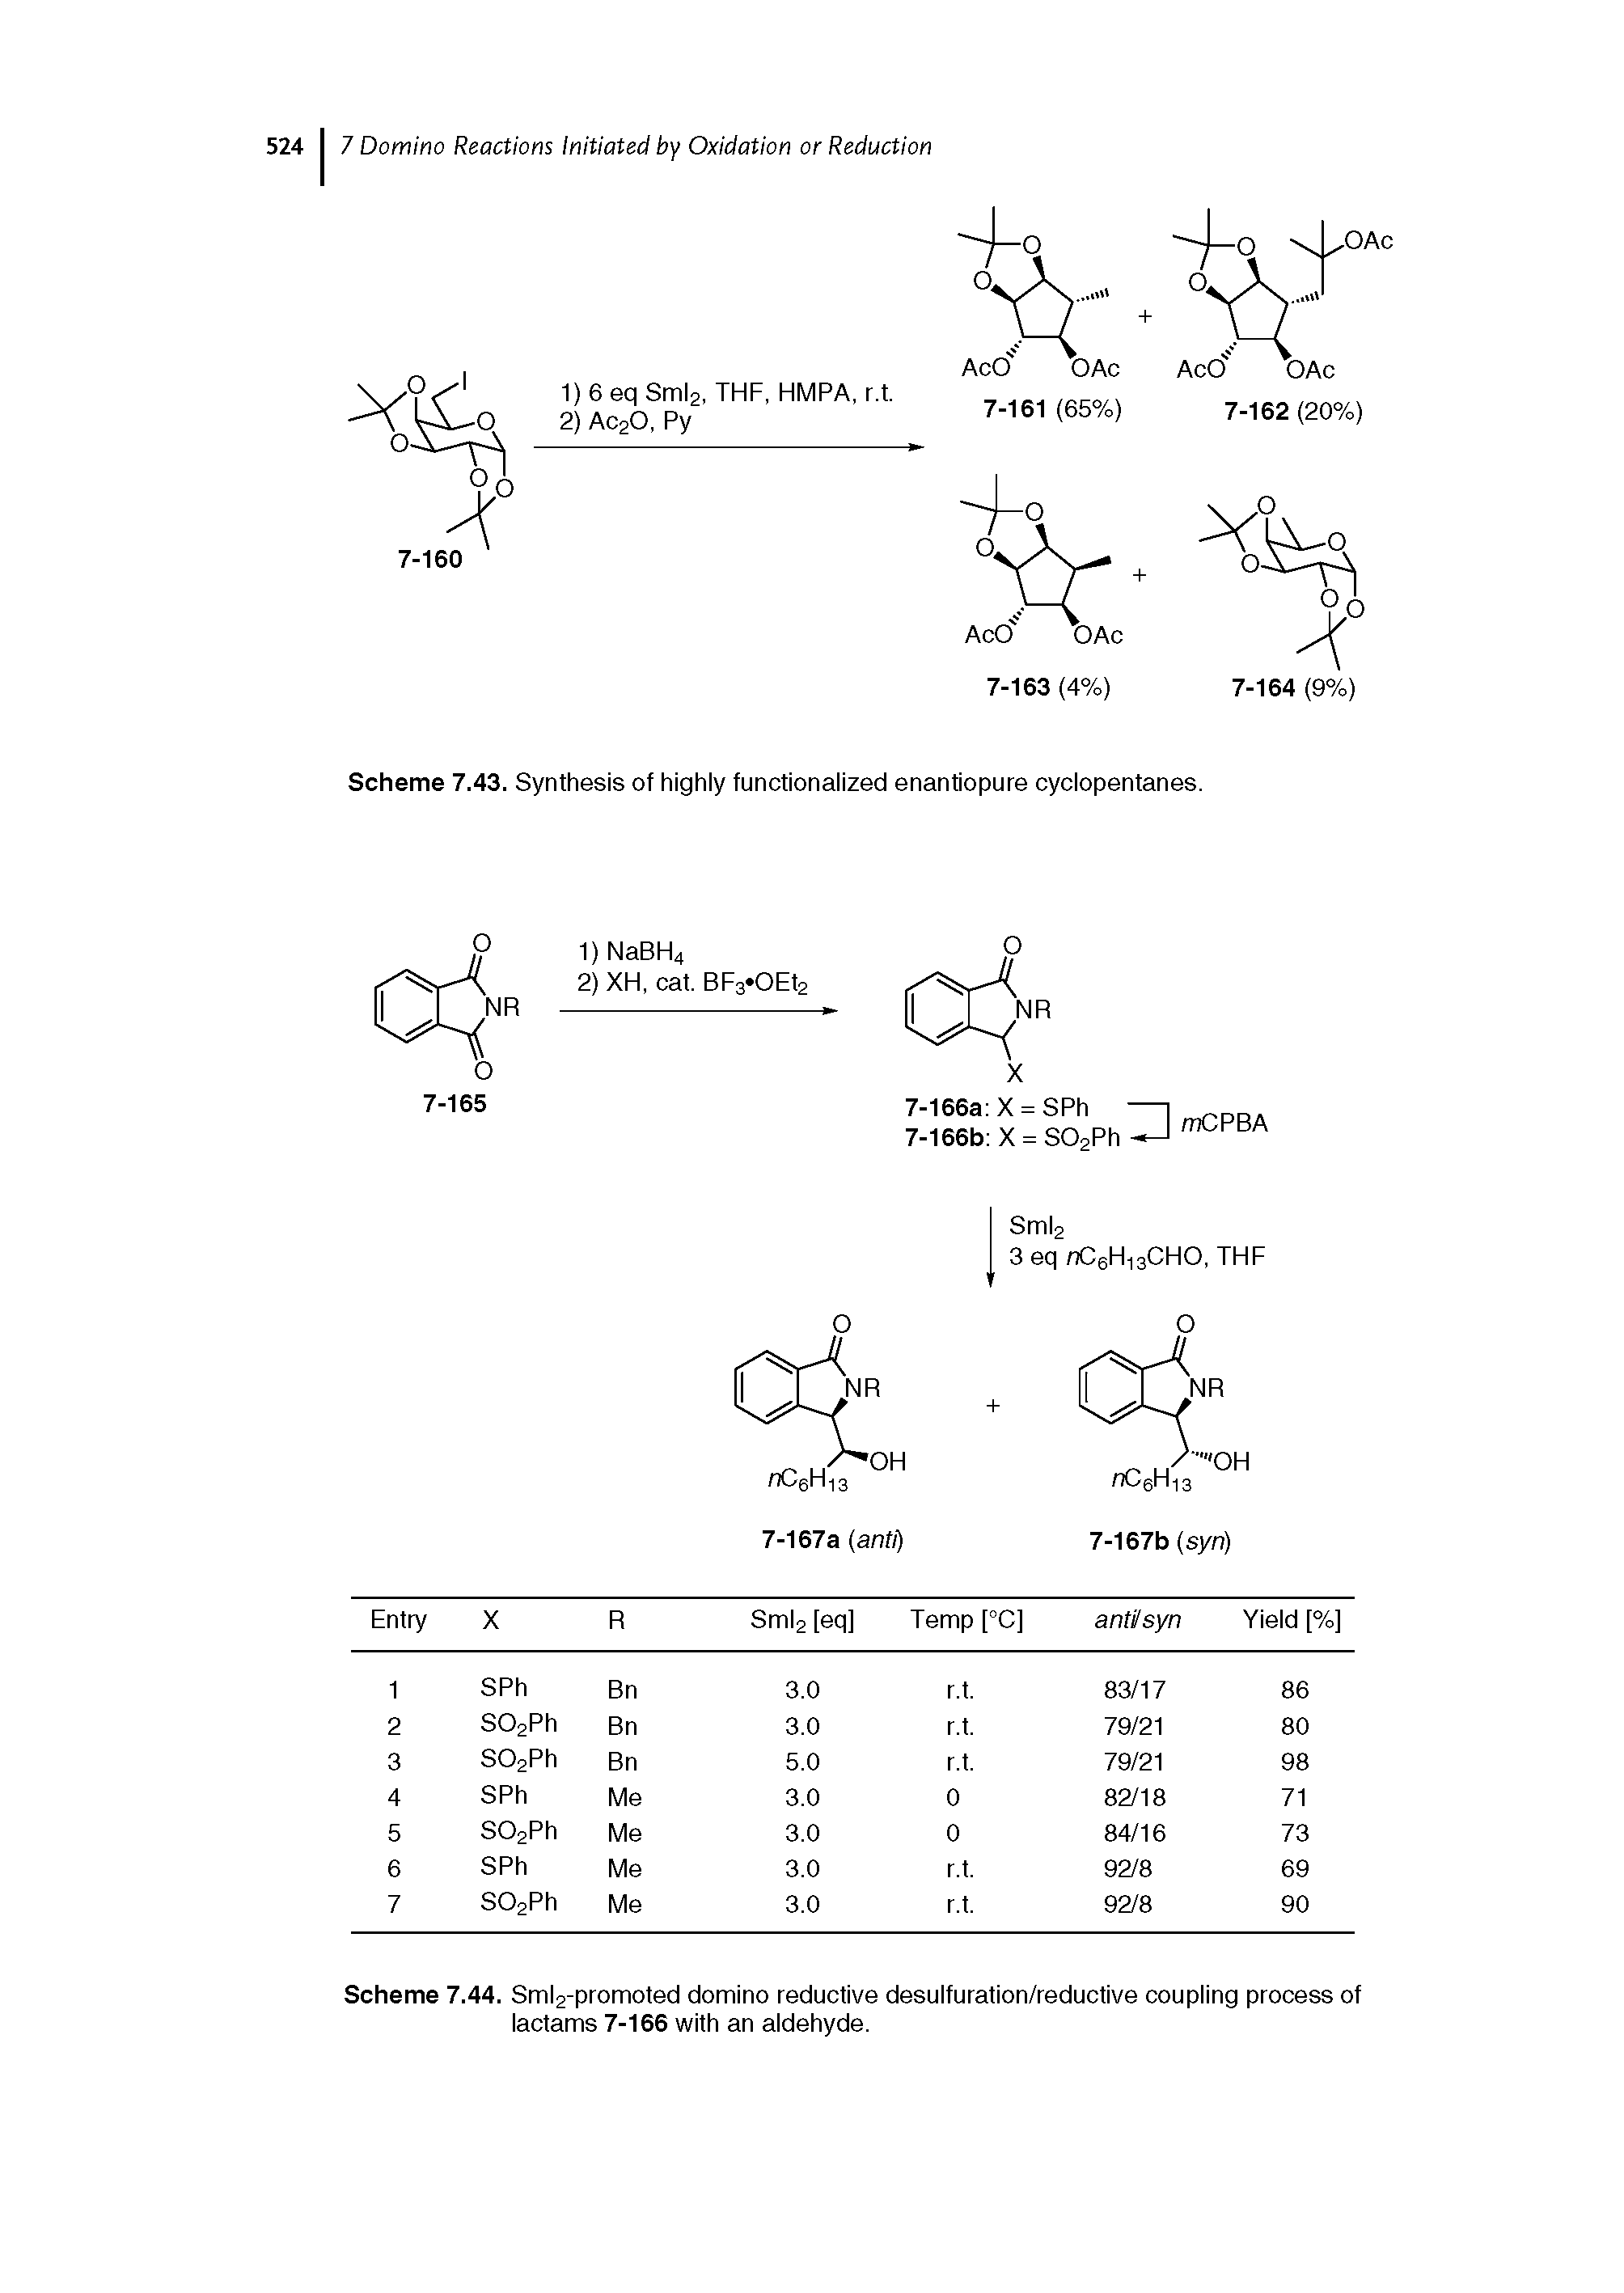 Scheme 7.44. Sml2-promoted domino reductive desulfuration/reductive coupling process of lactams 7-166 with an aldehyde.